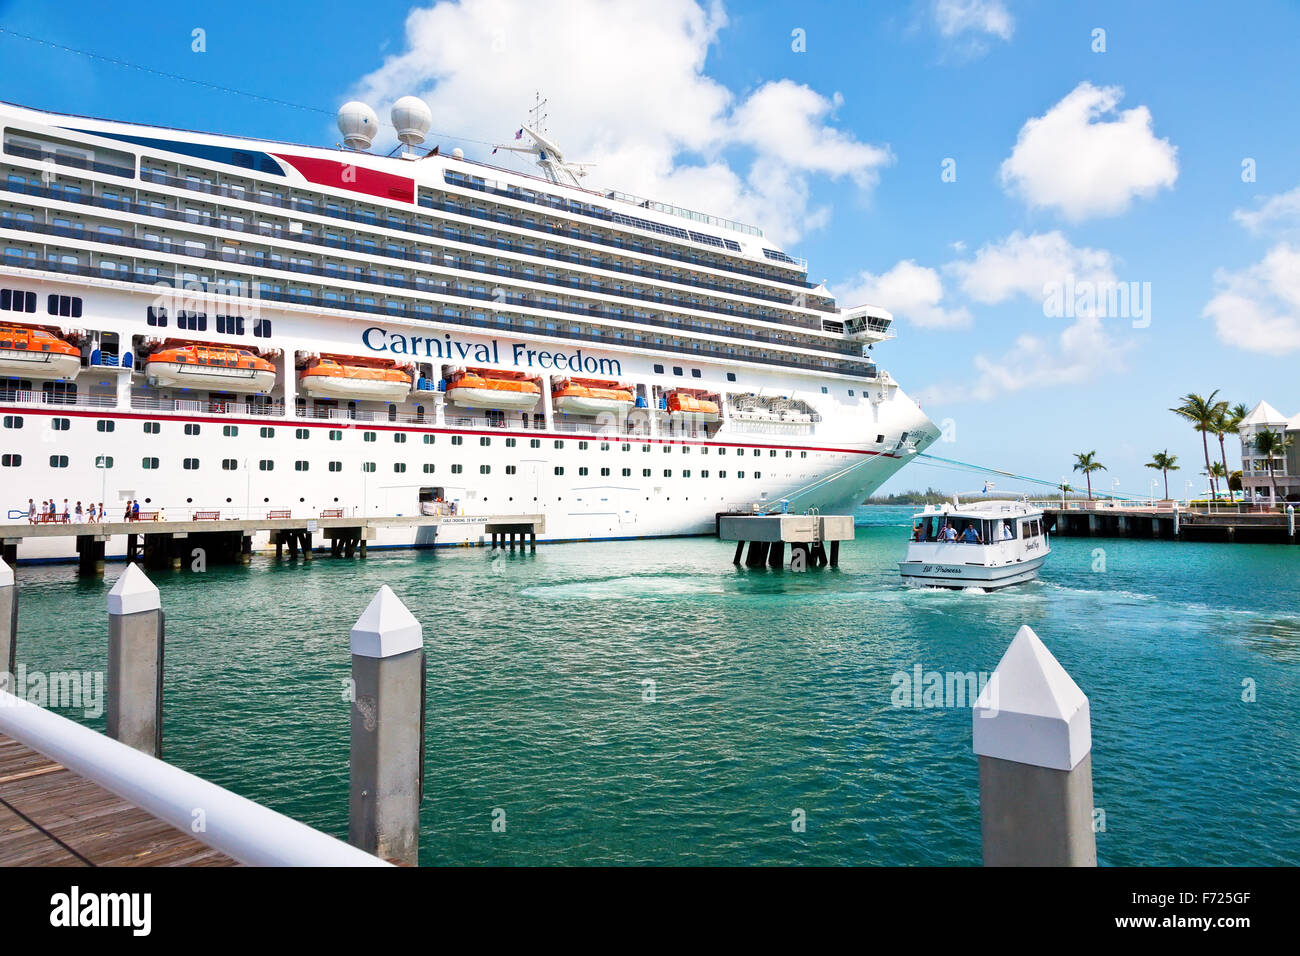 Carnival's cruise ship, The Freedom, anchored in Key West, Florida. Stock Photo